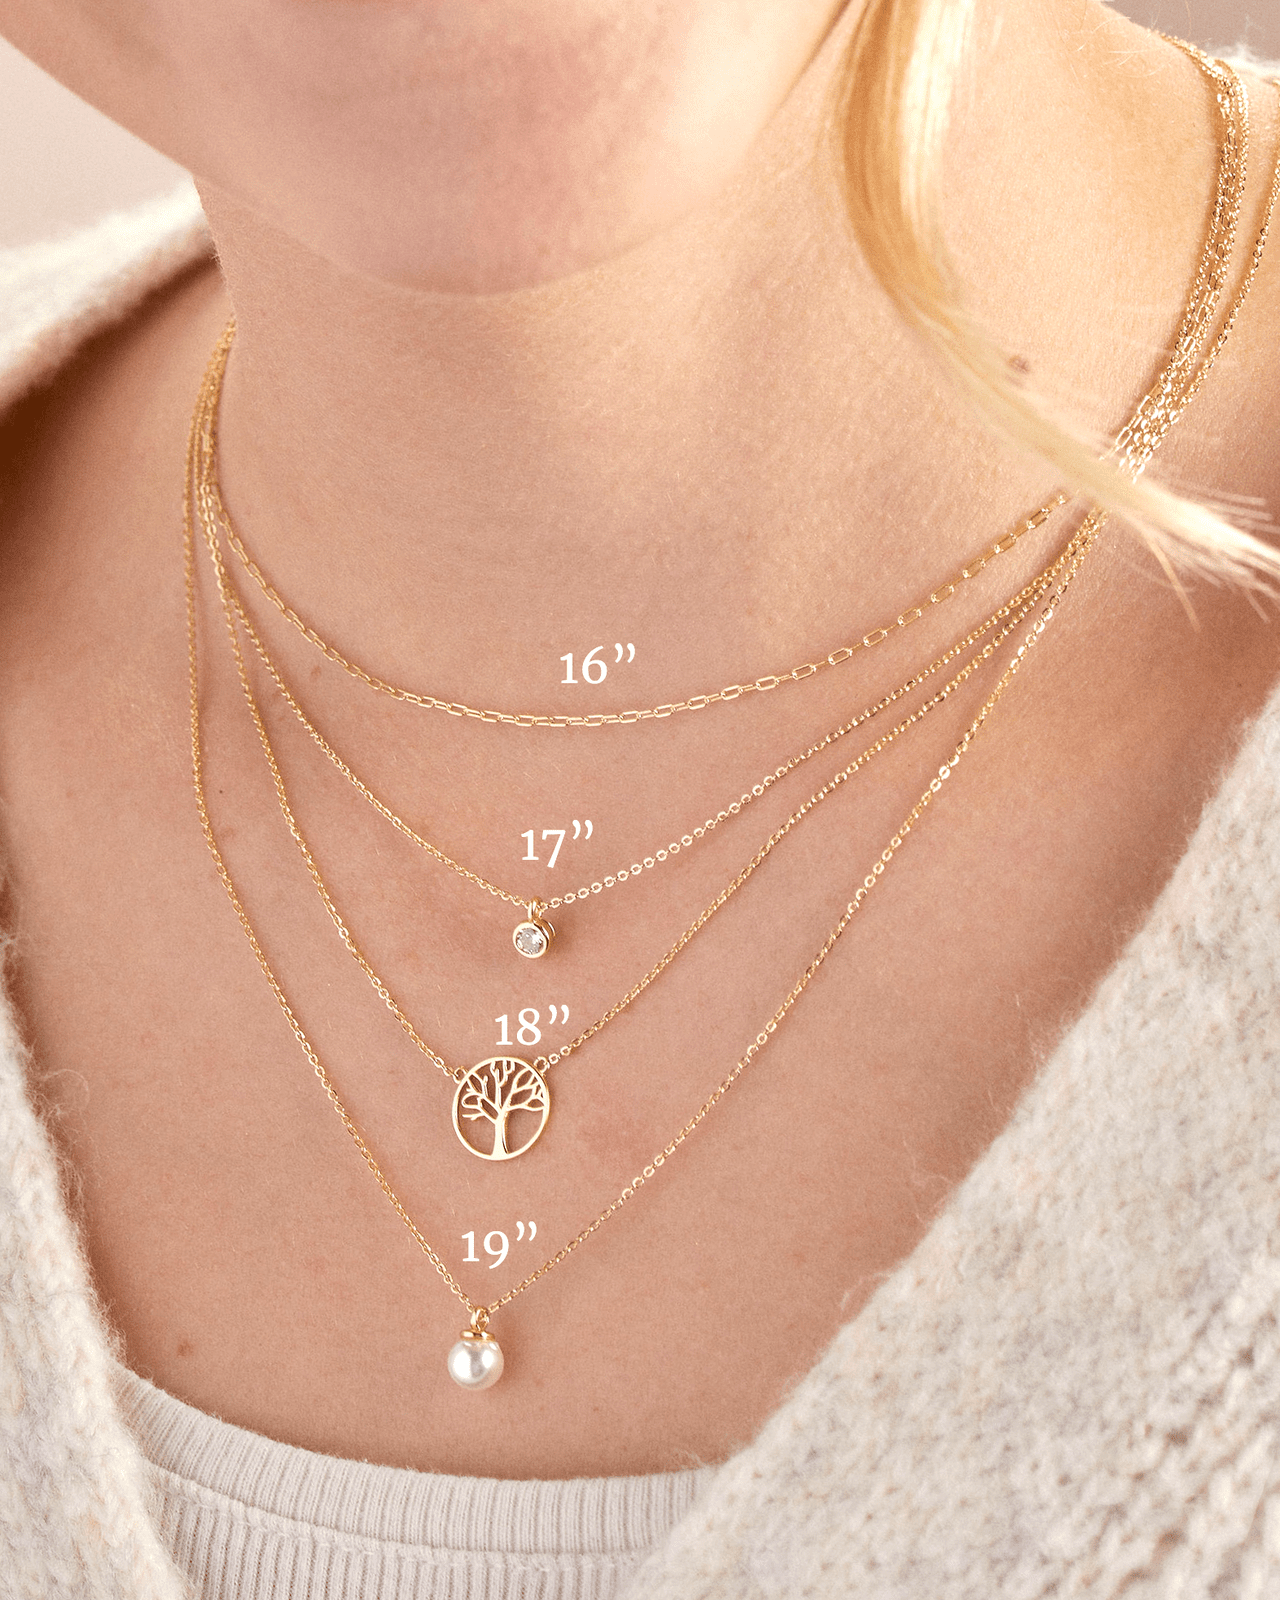 Jewelry sizing reference image that shows four sterling silver necklaces layered at 16 inches, 17 inches, 18 inches, and 19 inches